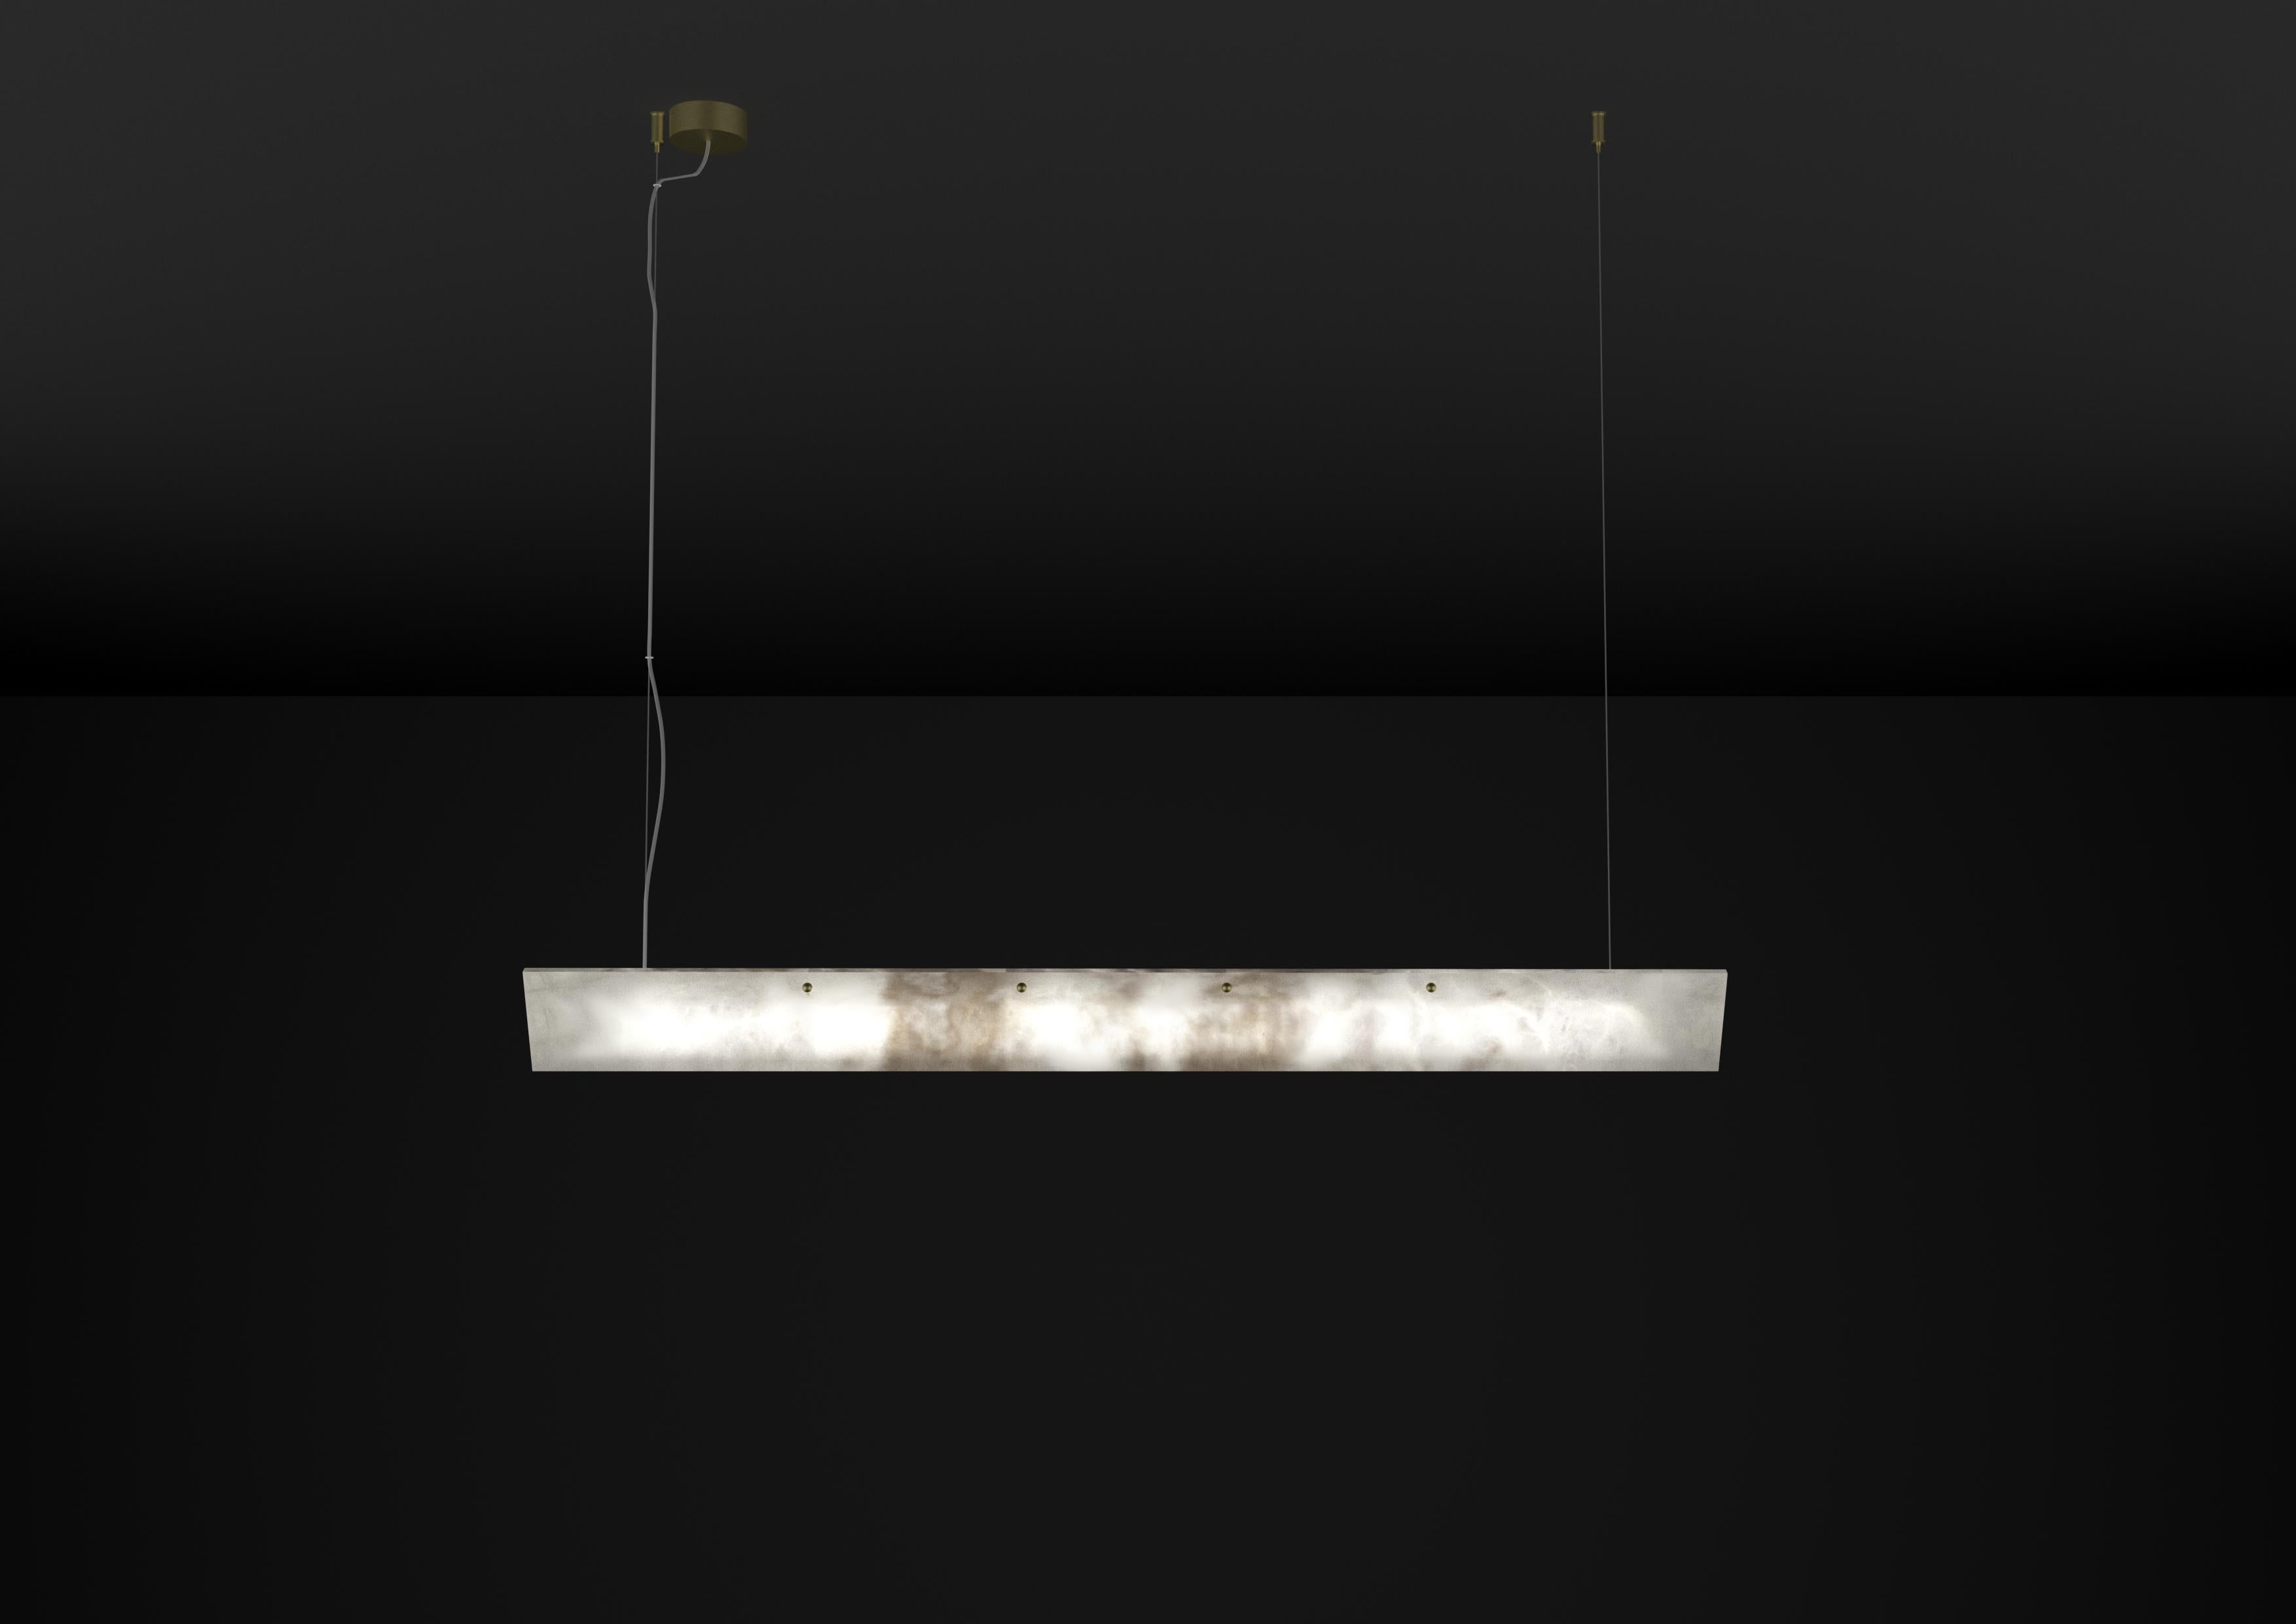 Ade L 1200 Pendant Lamp by Alabastro Italiano
Dimensions: D 10 x W 120 x H 8.5 cm.
Materials: White alabaster and metal.

Available in different finishes: Shiny Silver, Bronze, Brushed Brass, Ruggine of Florence, Brushed Burnished, Shiny Gold,